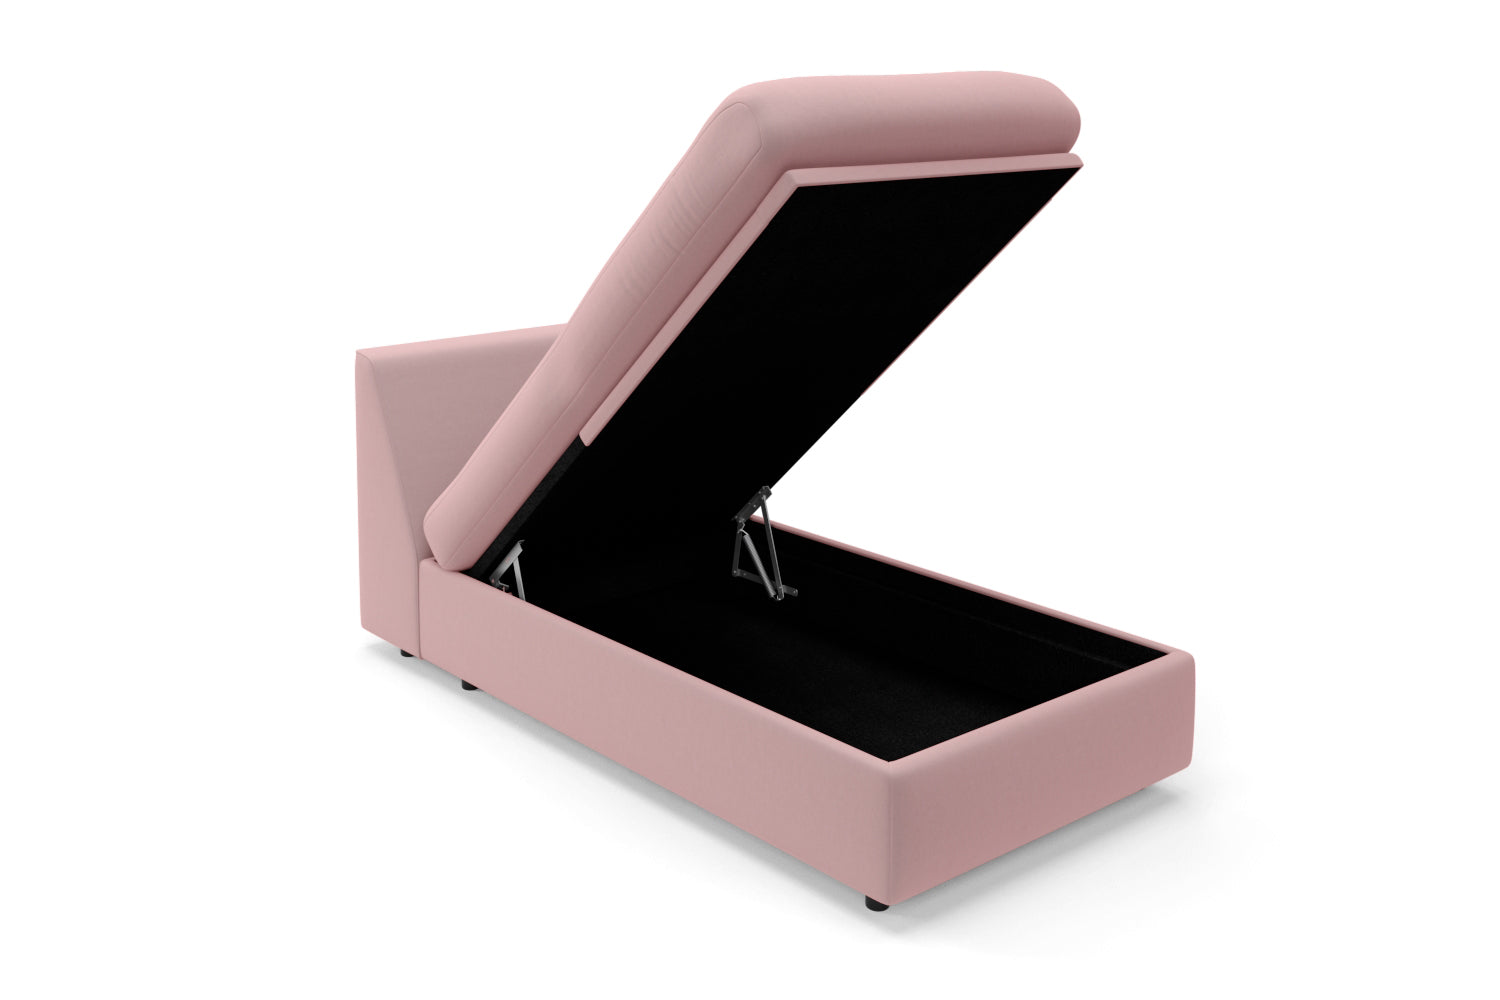 SNUG | The Small Biggie Chaise Longue in Blush variant_40575168151600